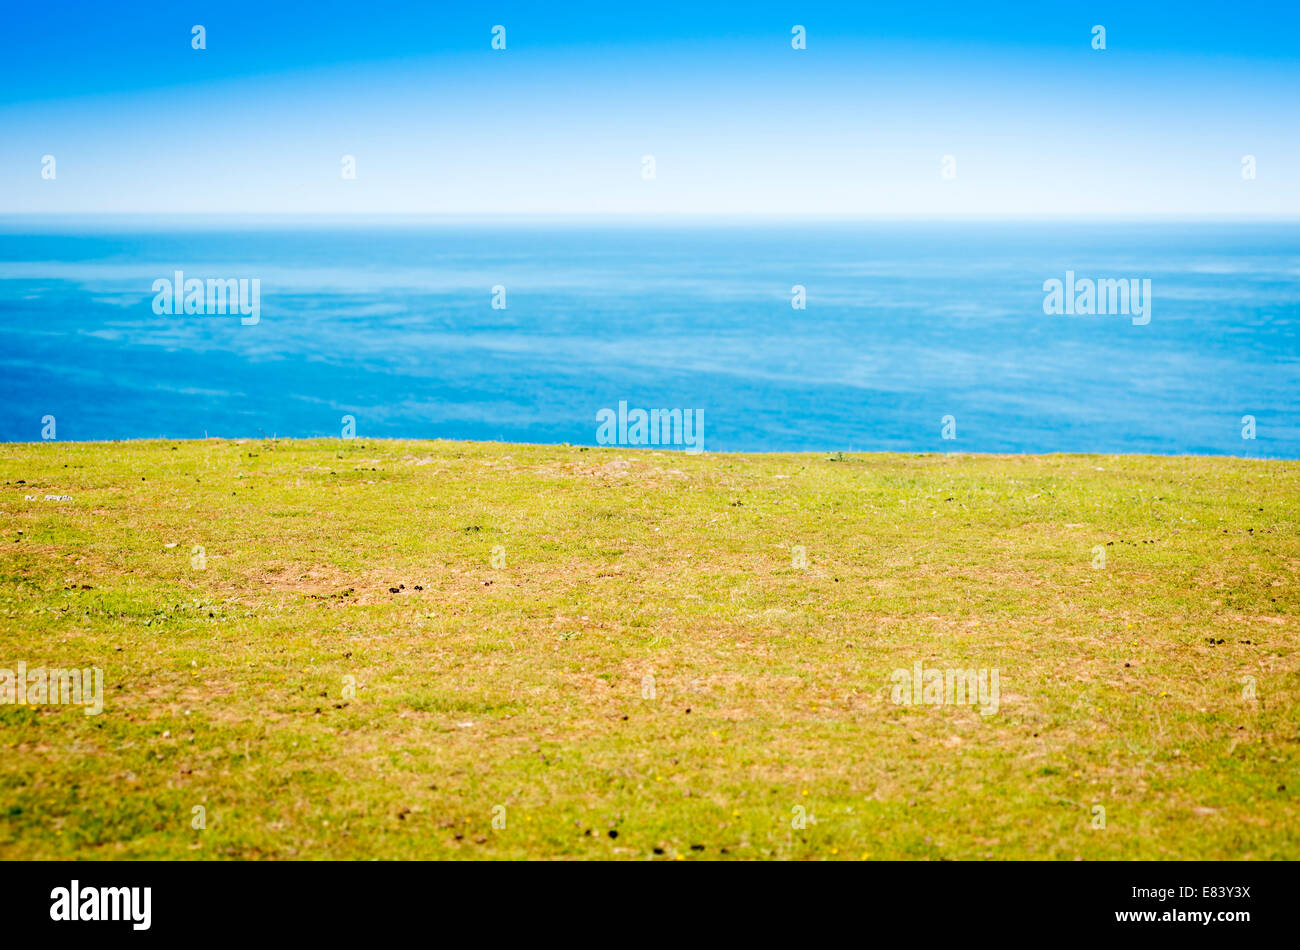 Green field with ocean behind and blue sky with shallow focus on the grass only Stock Photo